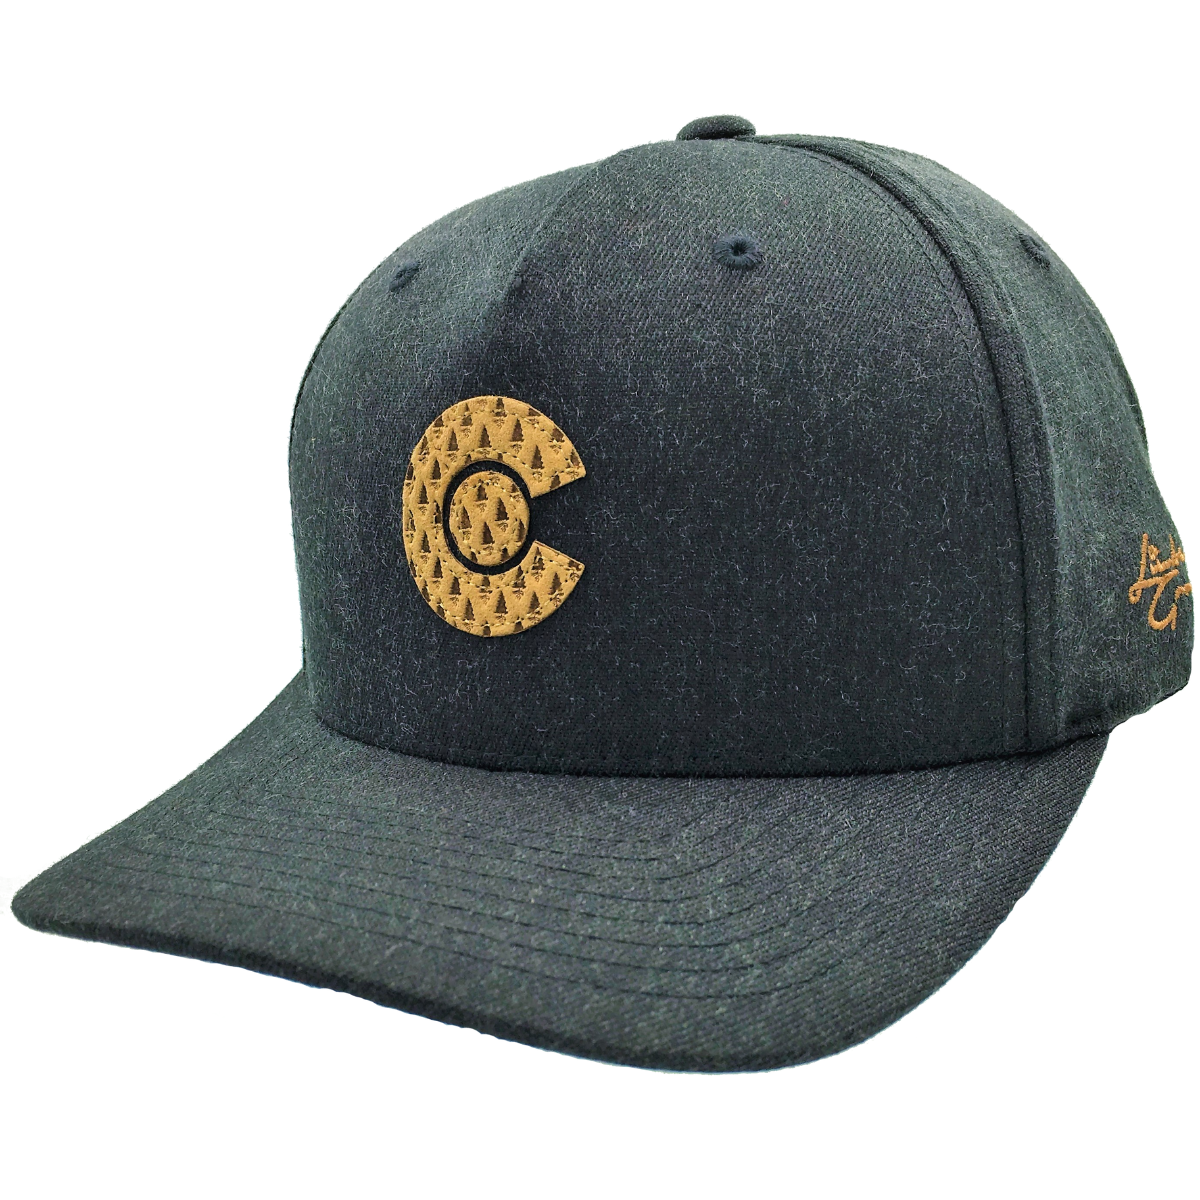 Limber Grove Fitted Hats